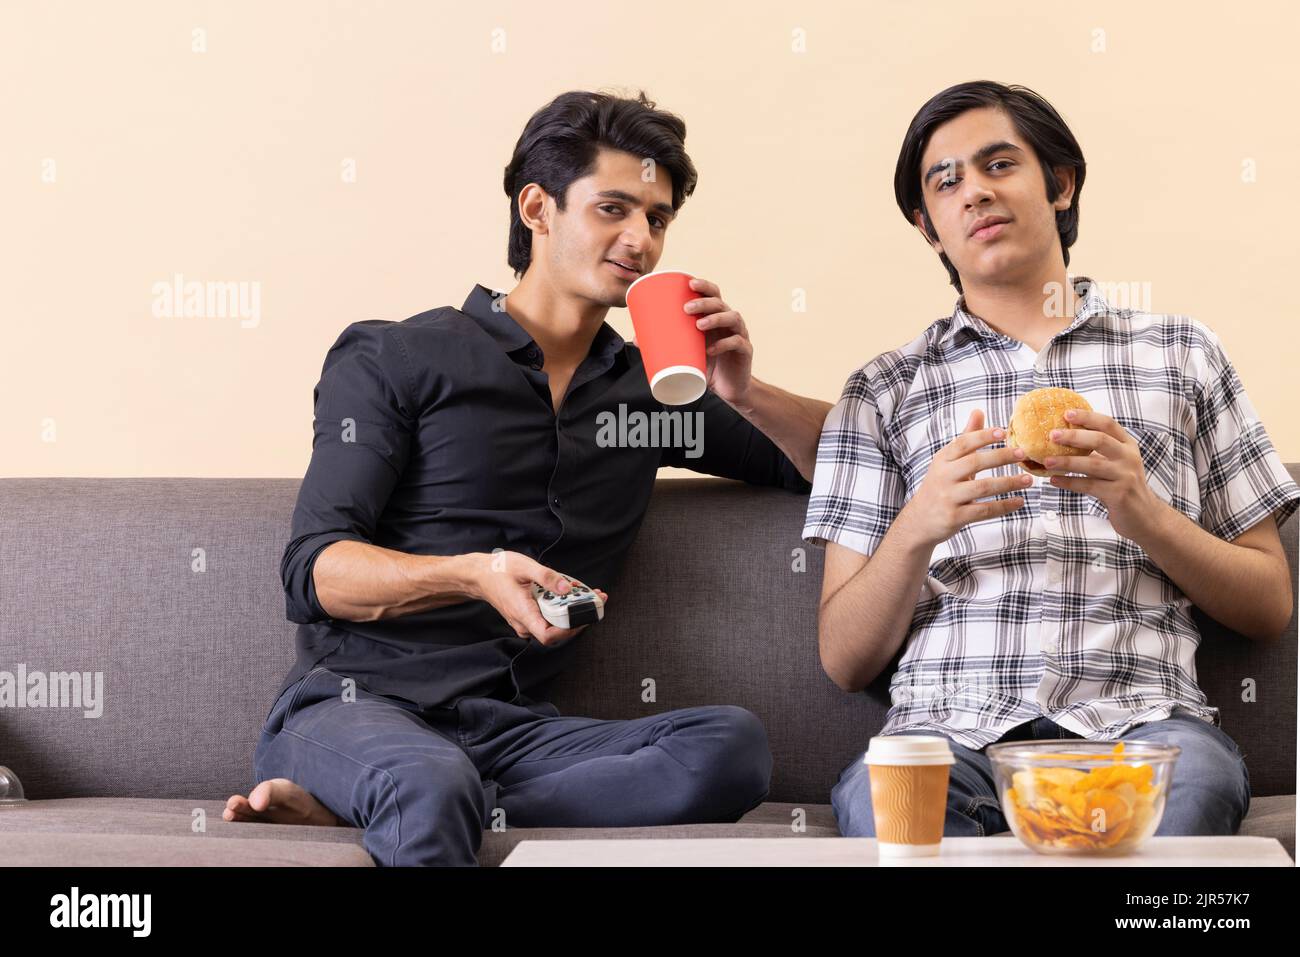 Two happy teenage boys eating fast foods and watching TV together at home Stock Photo